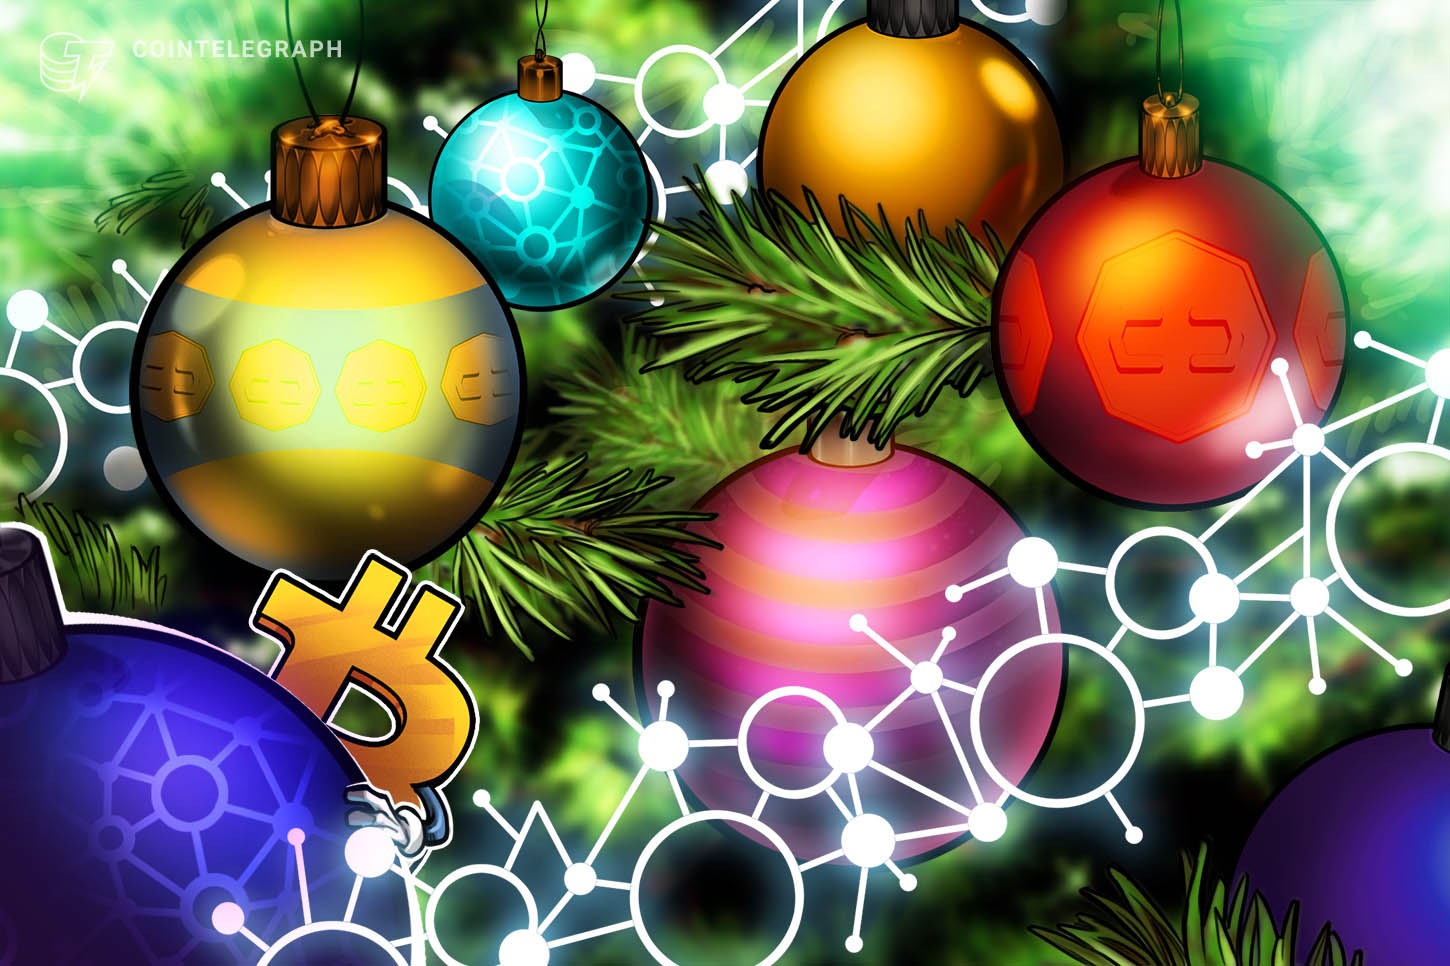 Neglect the milk and cookies, Santa is accepting Bitcoin this vacation season